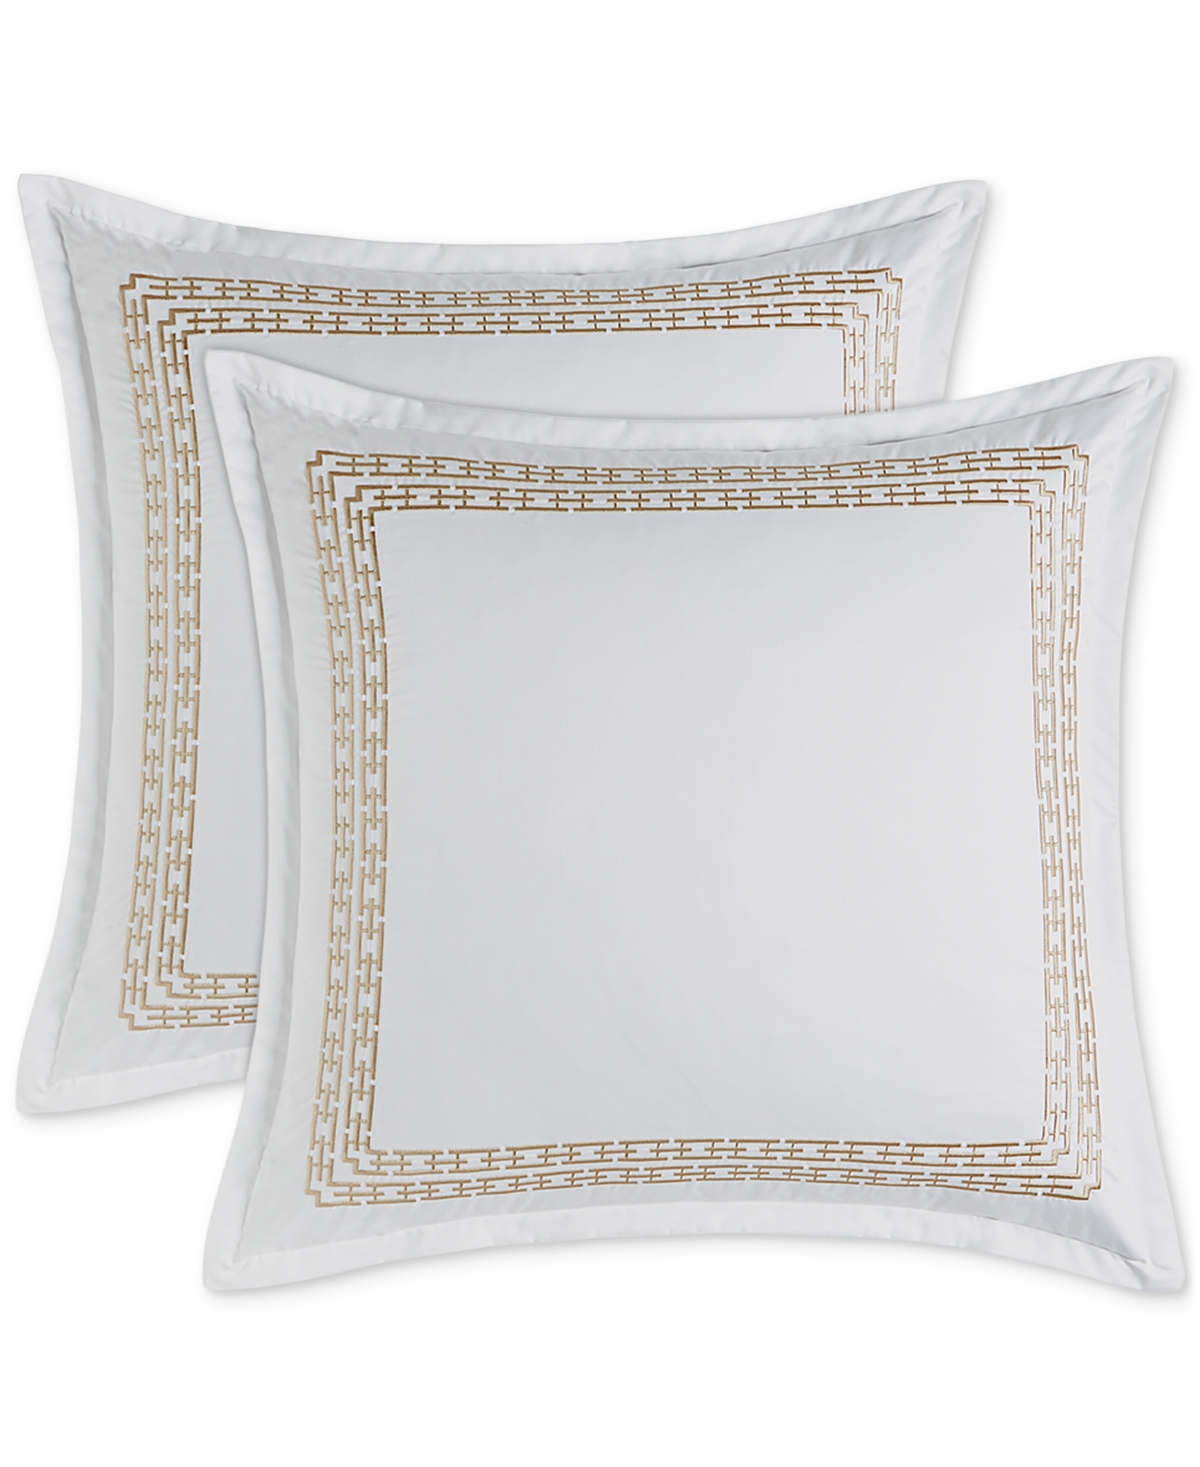 Chain Links Embroidery 100% Pima Cotton 2-Pc. Sham Set, Euro, Created for Macy's - Champagne